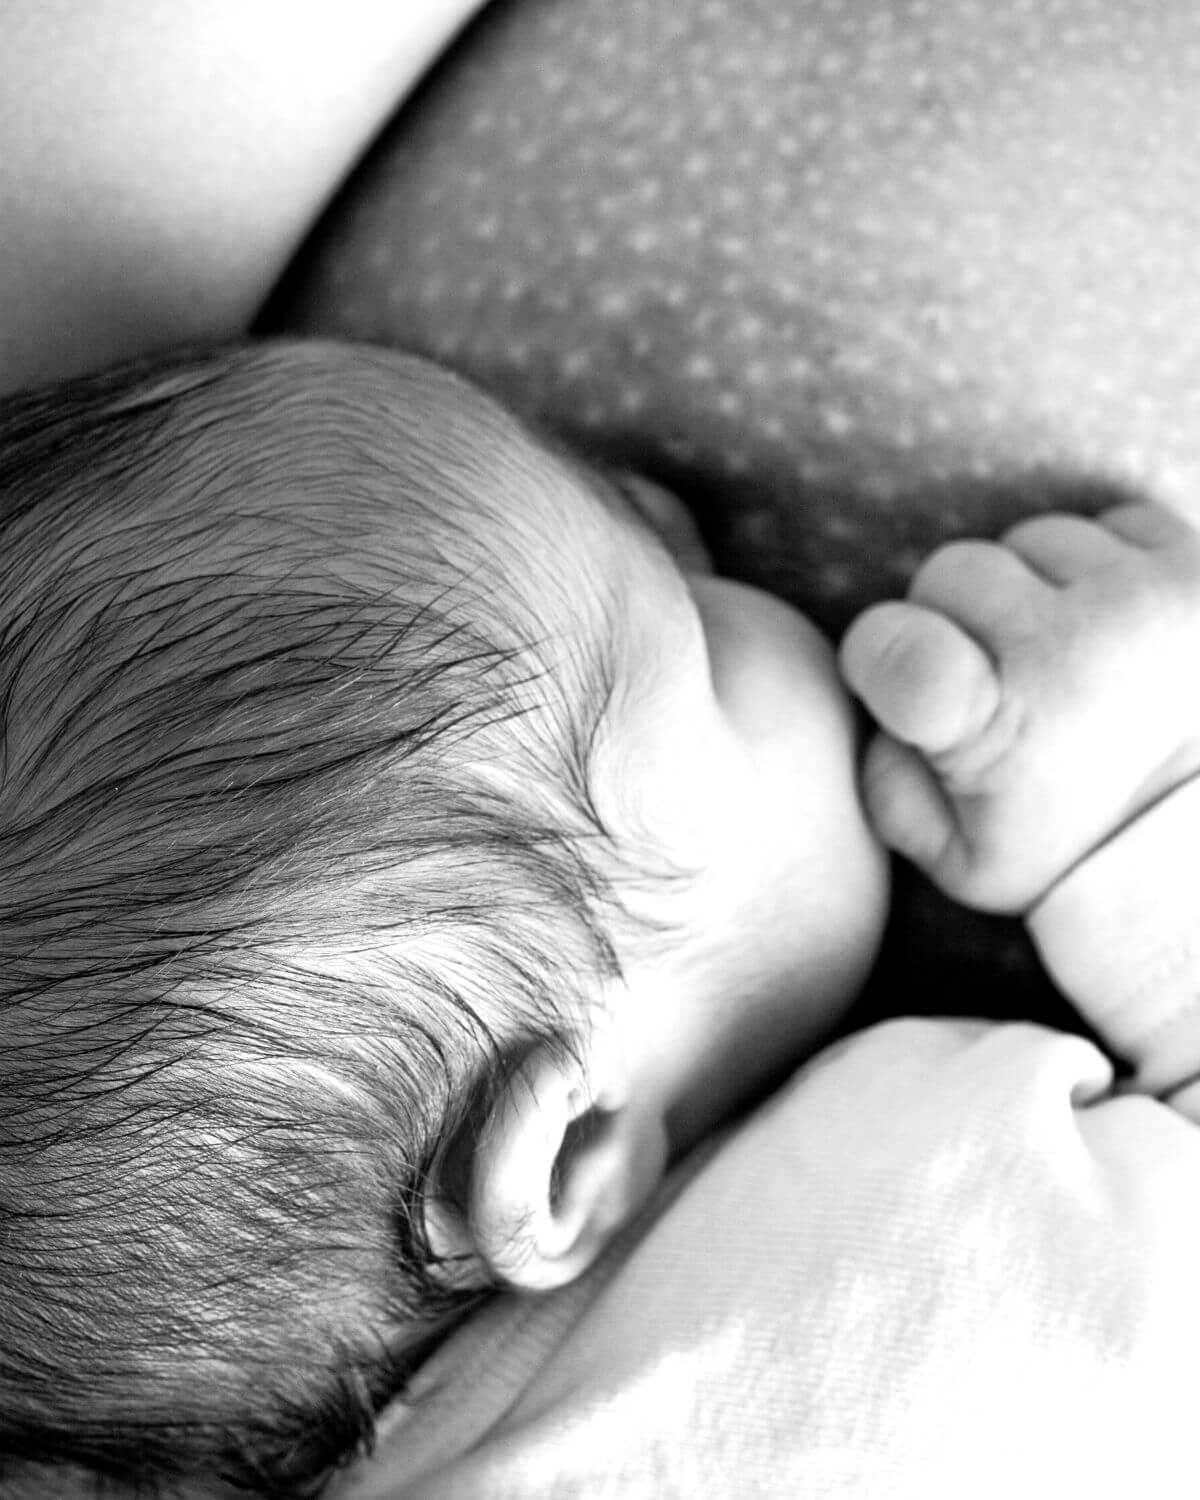 Sore nipples from breastfeeding: Causes and proper care - sanosan